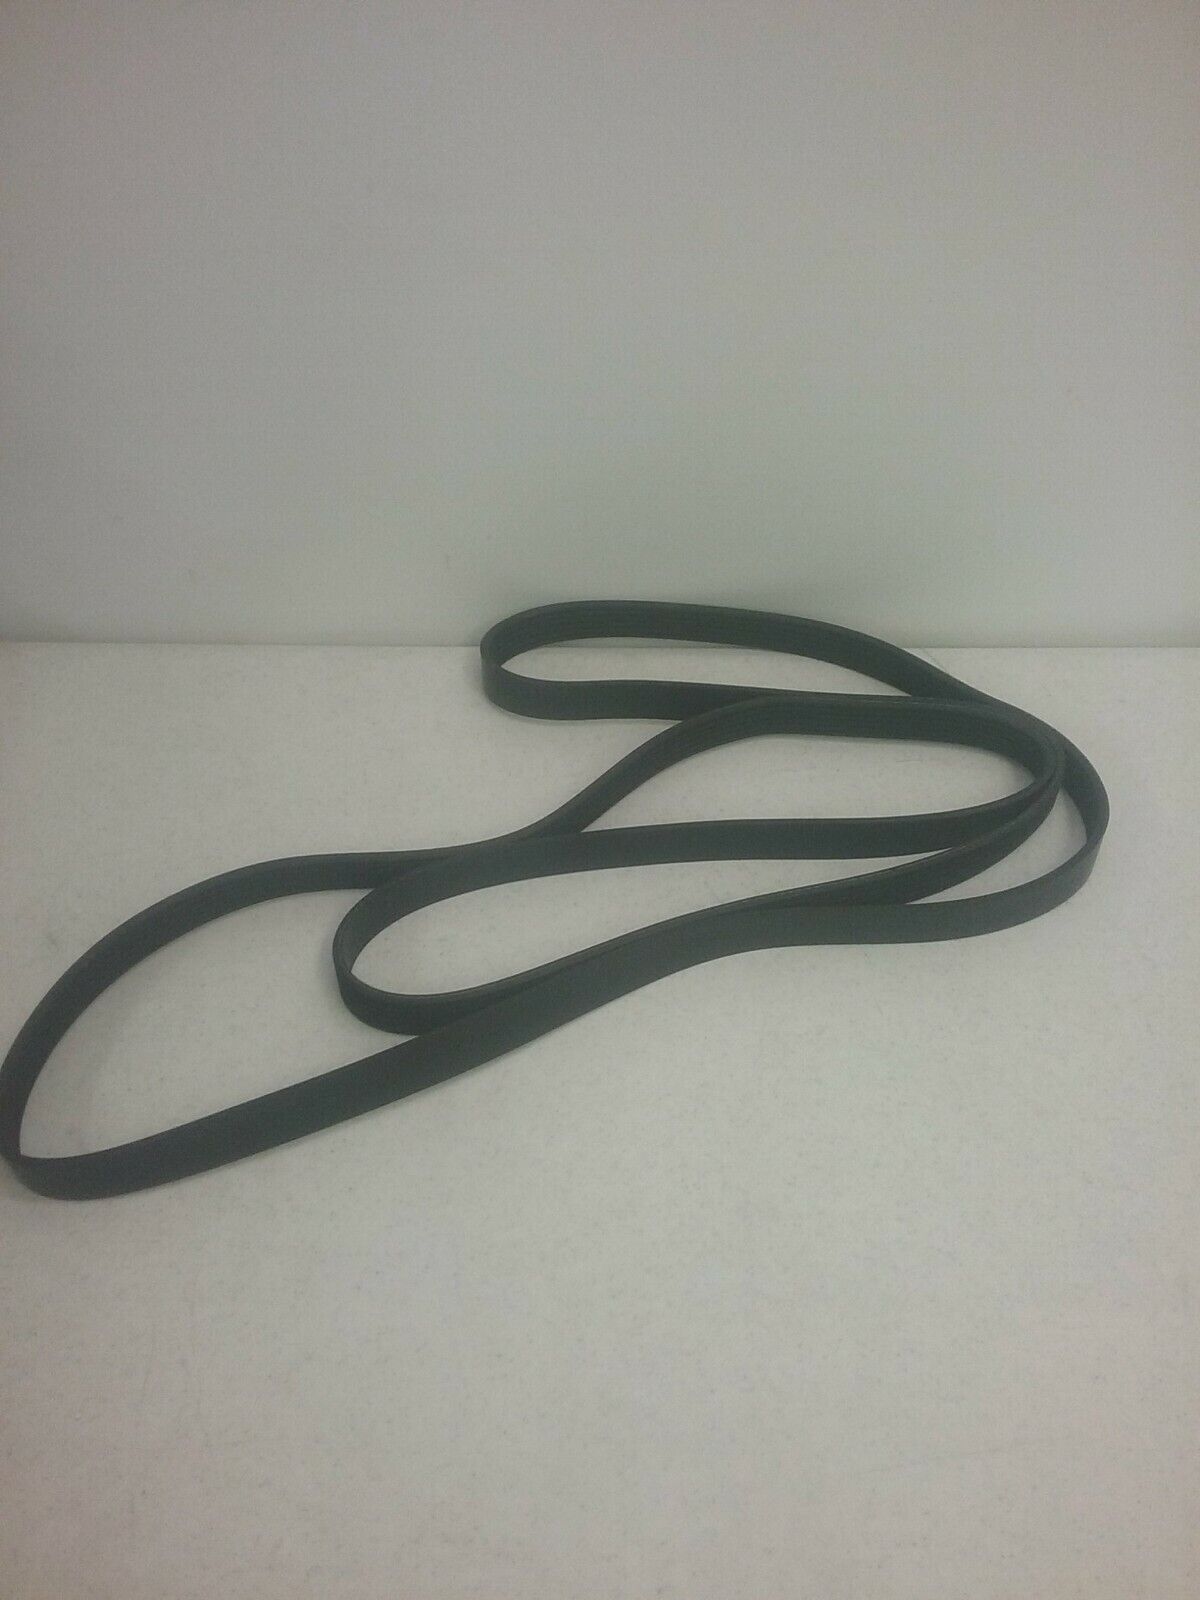 6PK915 Serpentine Belt Made In Mexico 